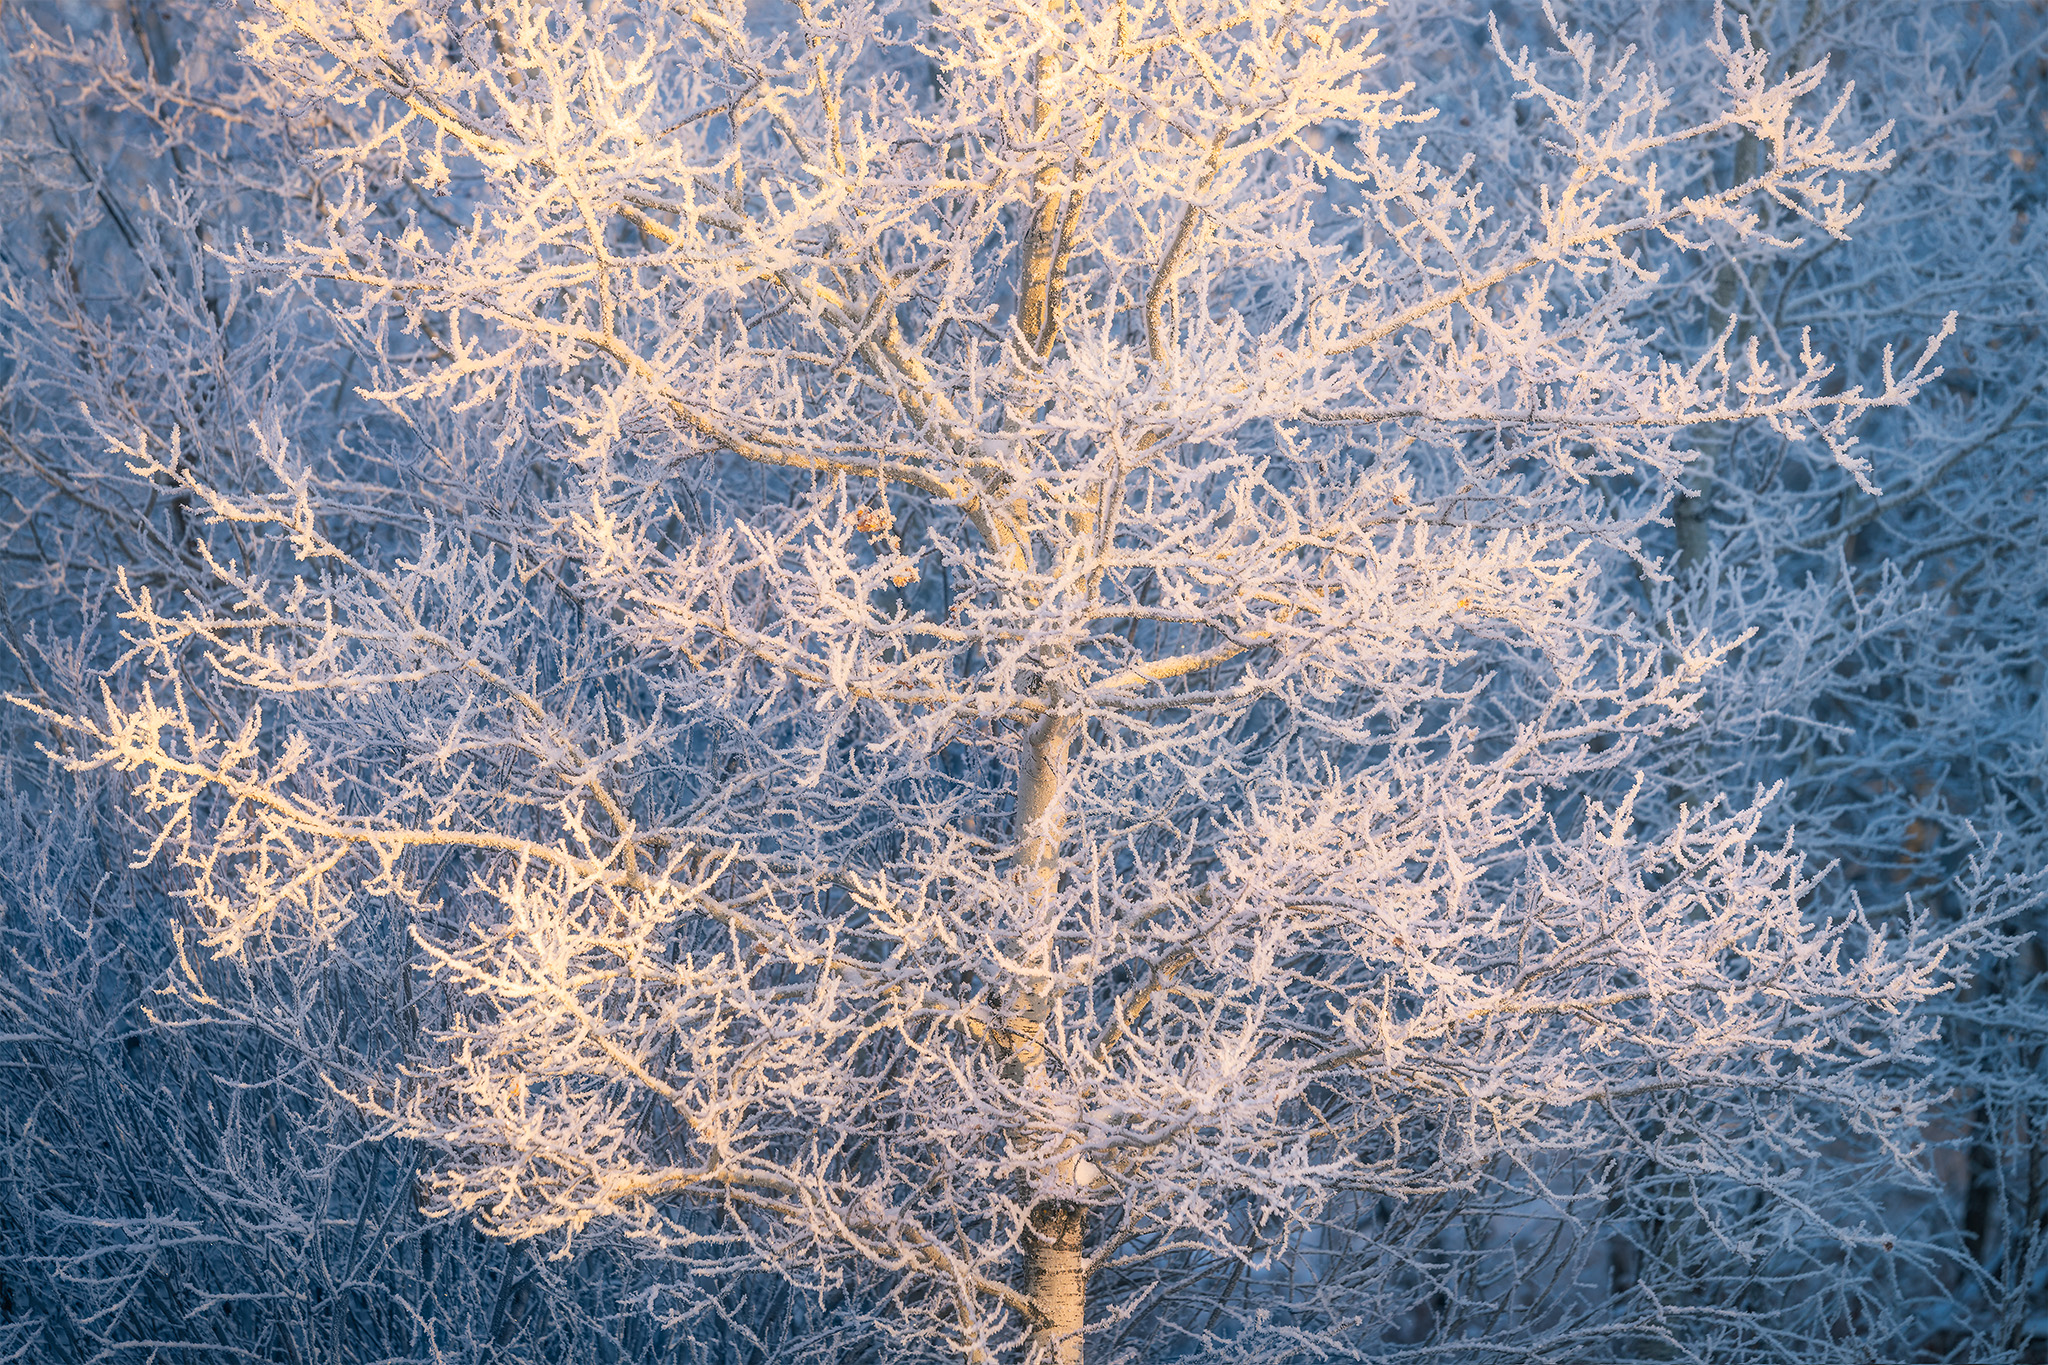 An intimate landscape photograph of an aspen tree covered in hoar frost in white butte trails in morning light in Saskatchewan